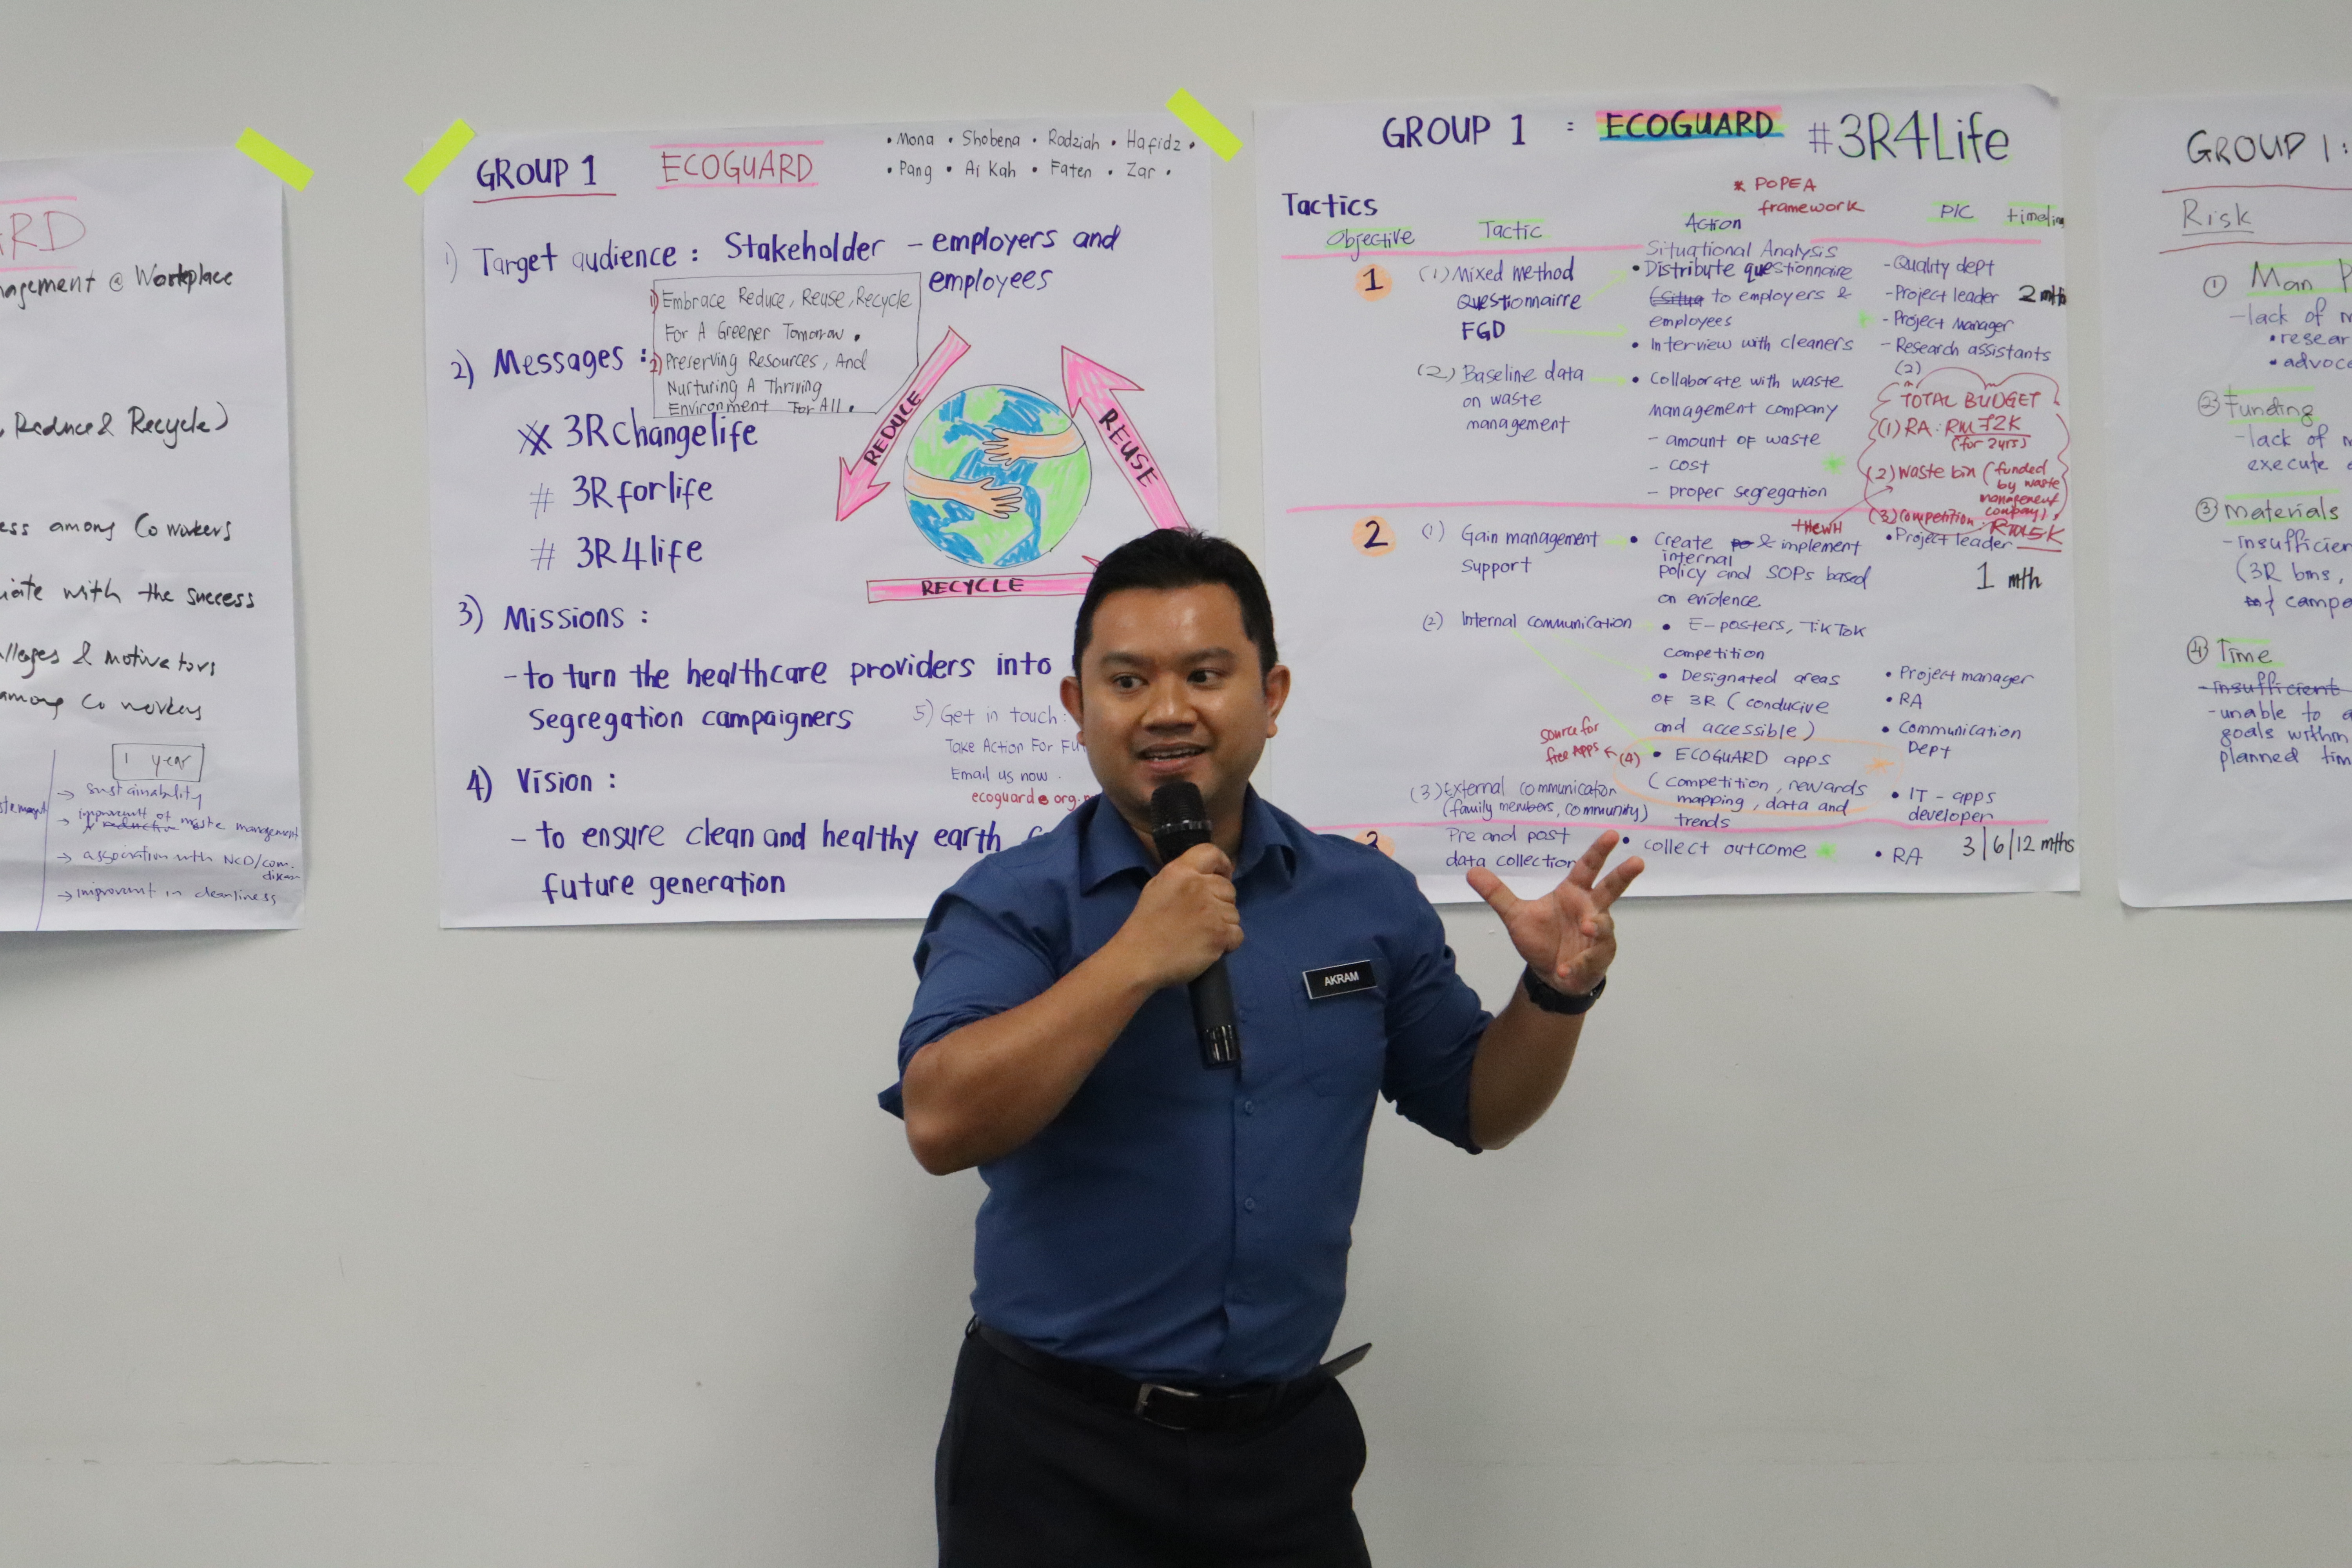  Climate and Health Campaign and Advocacy Training in Selangor, Malaysia - HCWH Asia